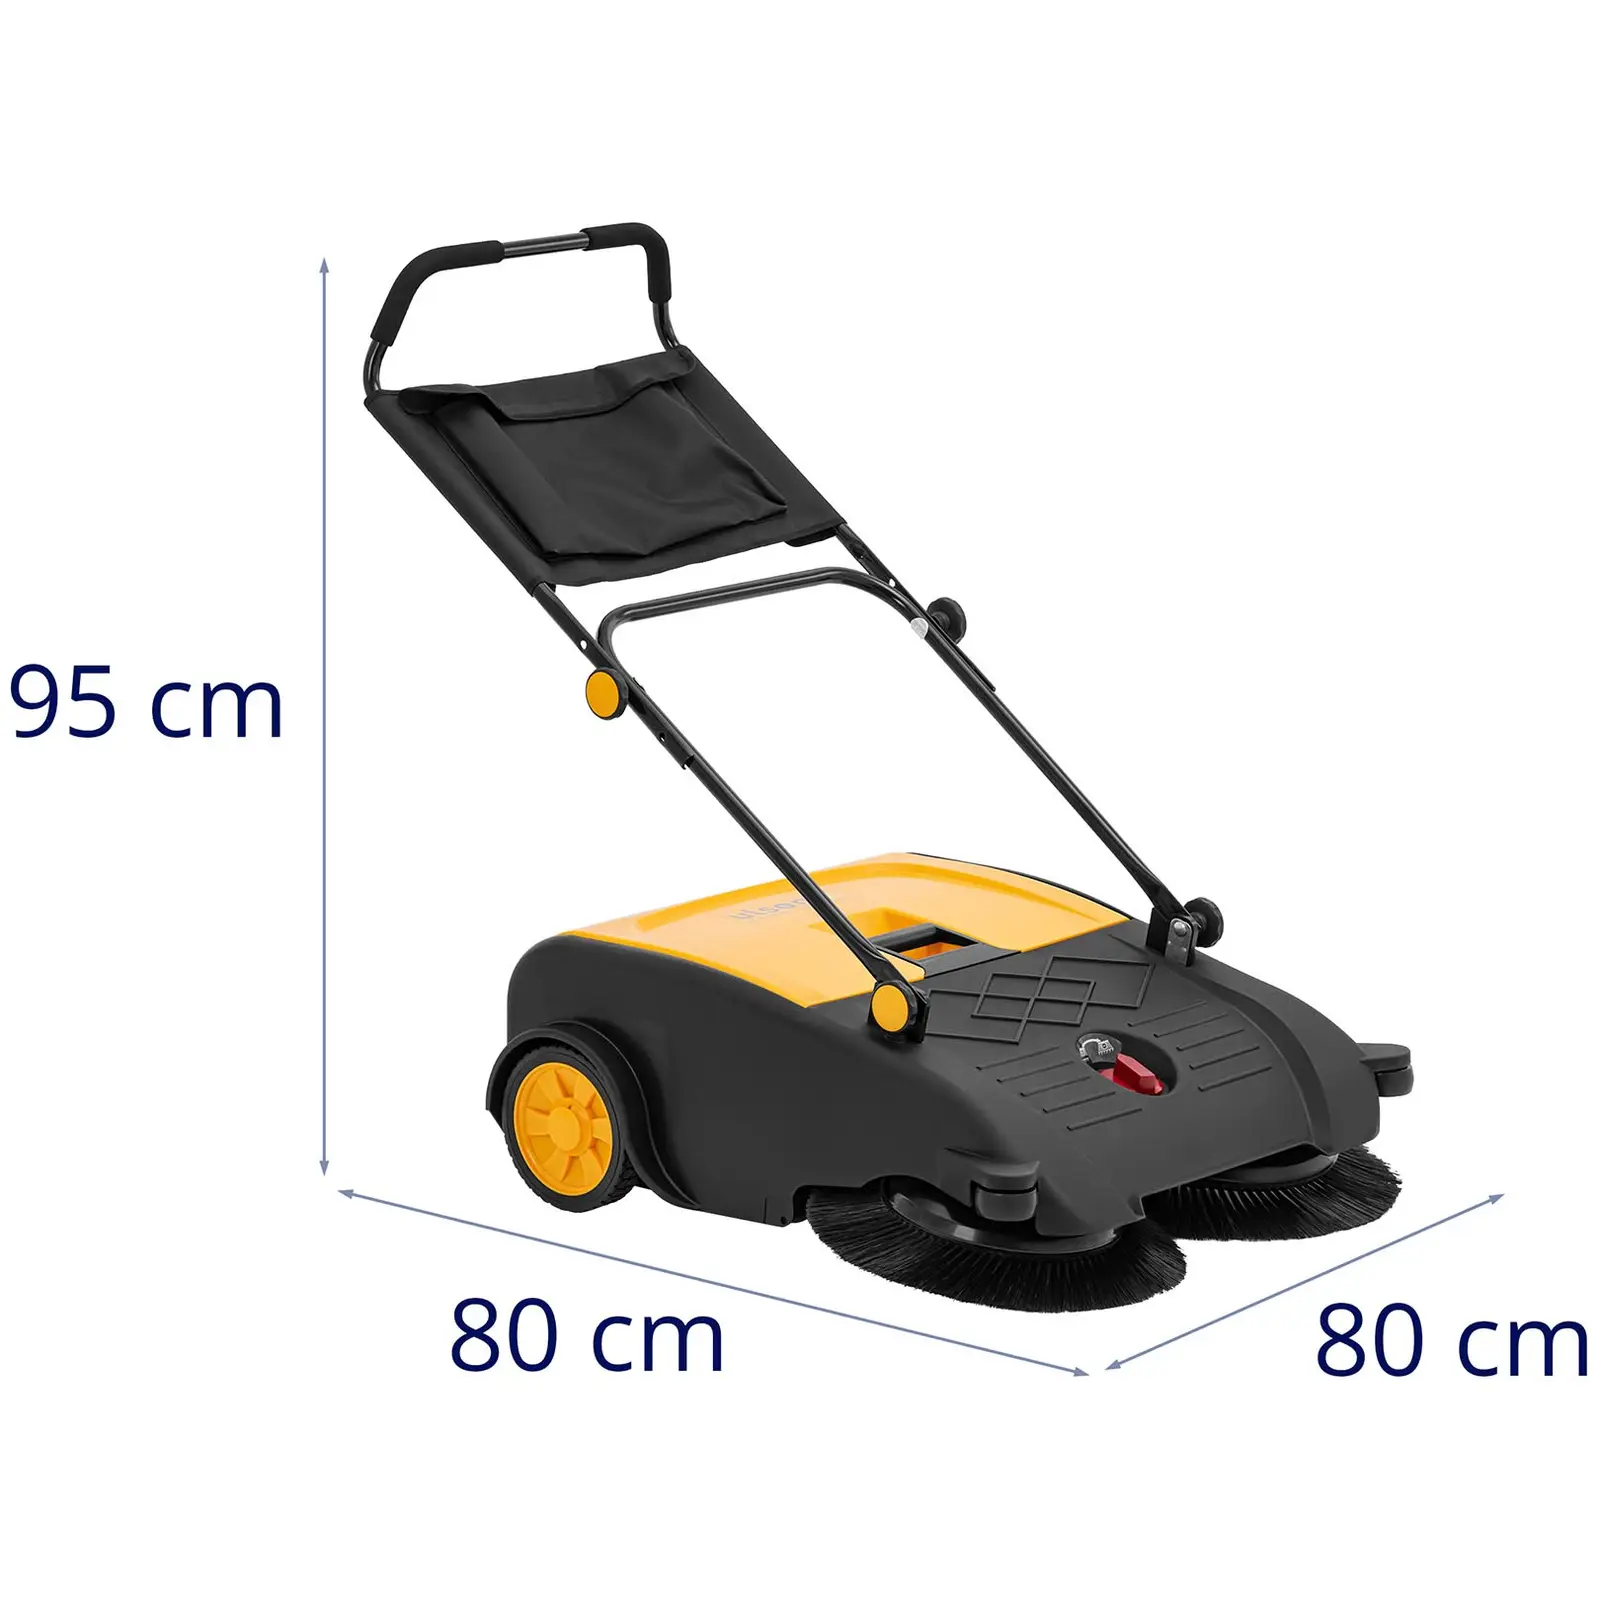 Manual Sweeper - 2 side brushes - 2300 m²/h